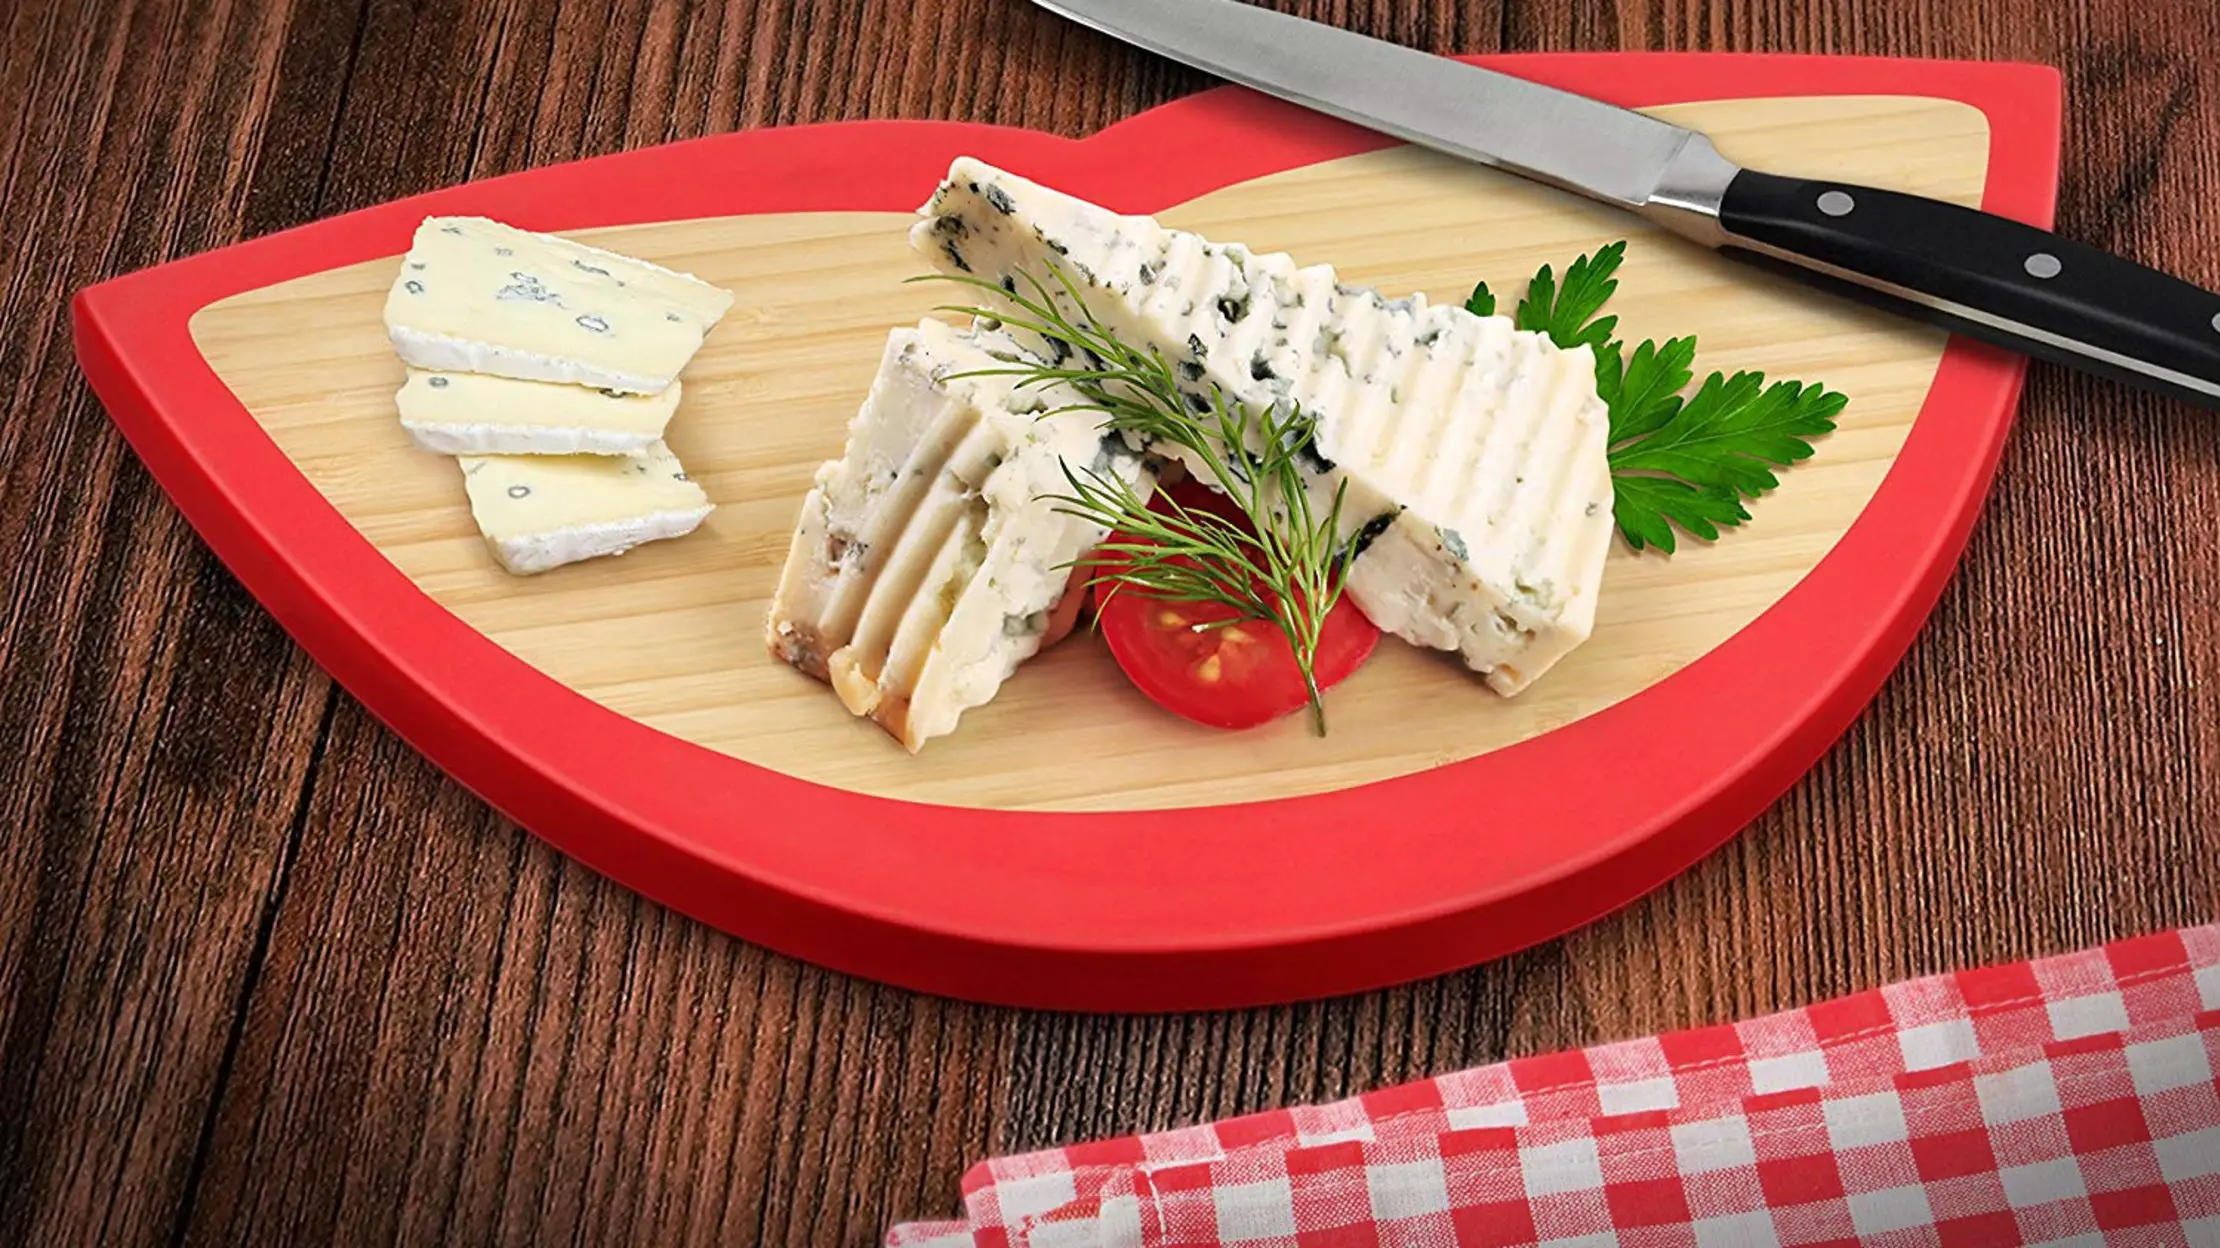 11 Unusual Cutting and Cheese Boards